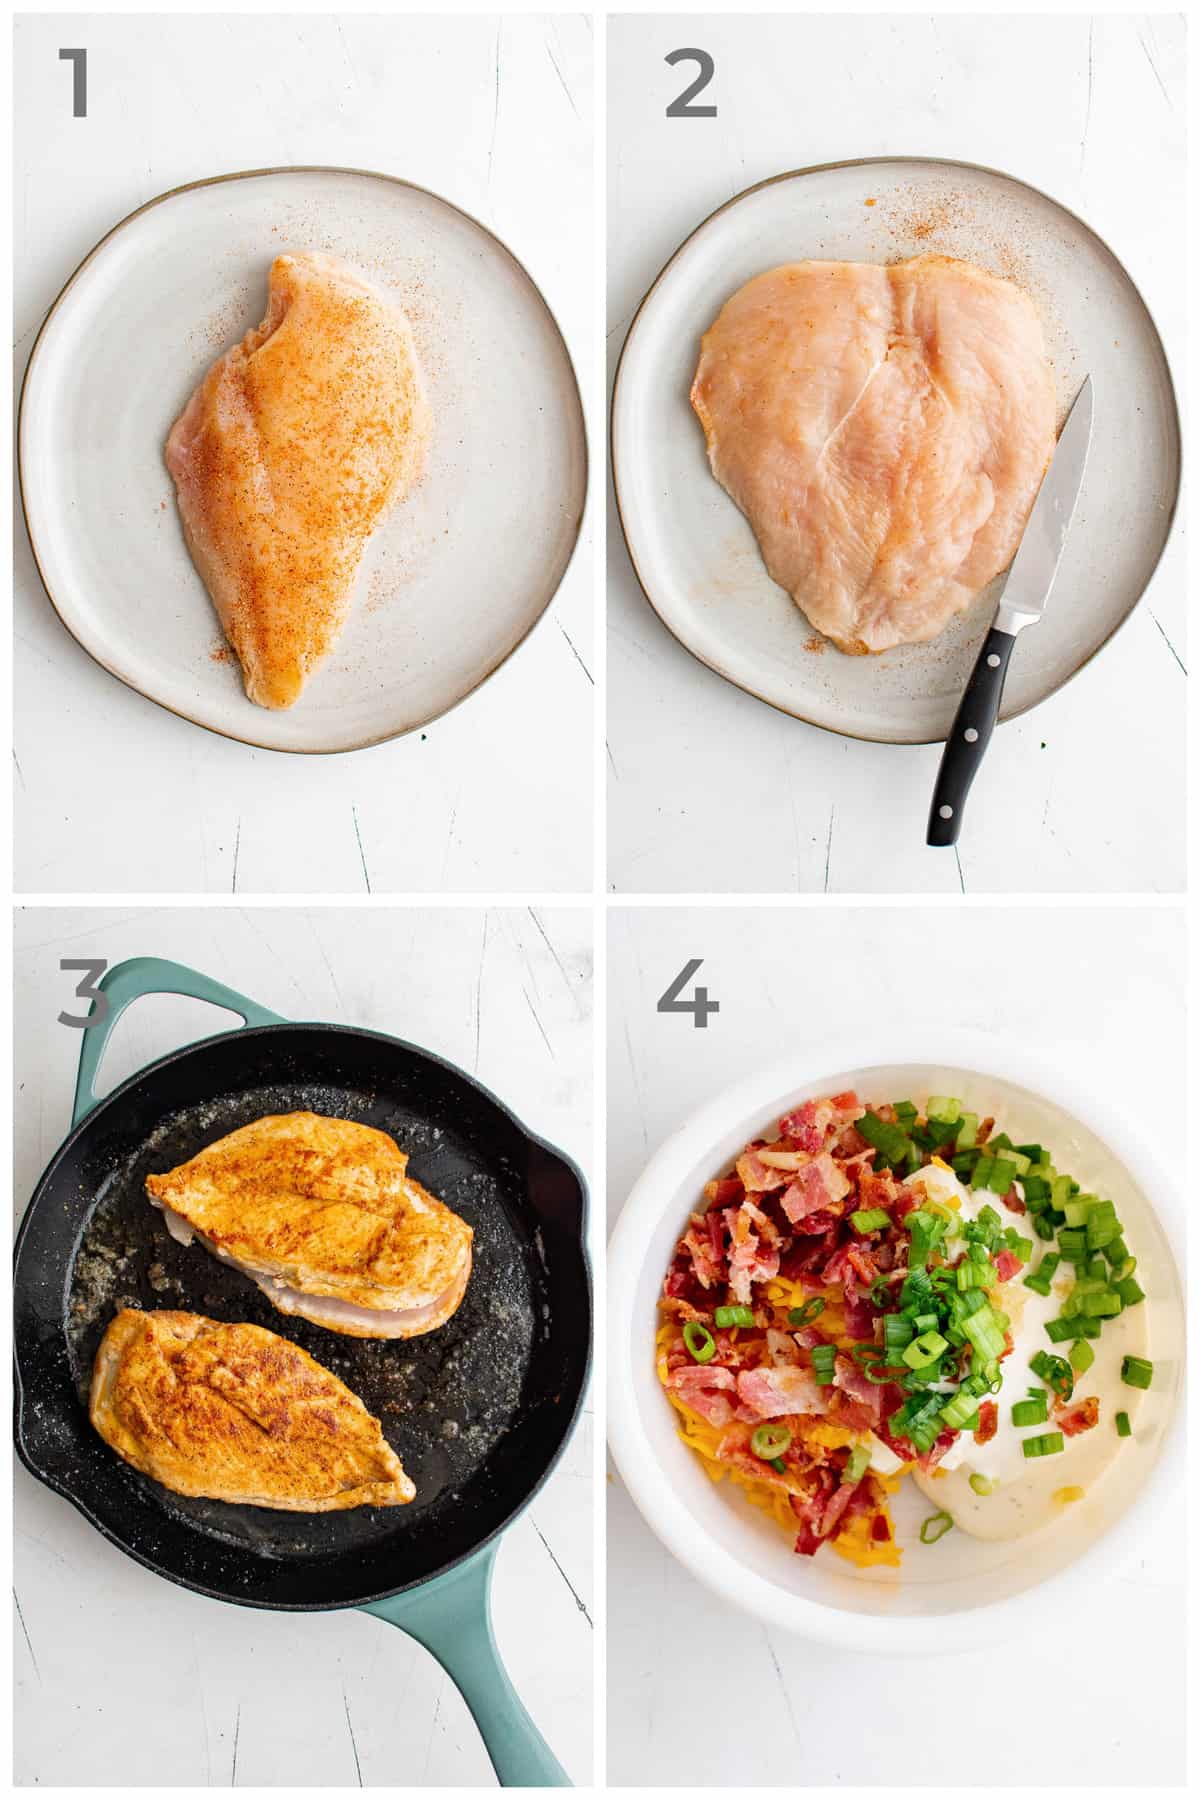 Step by step instructions for how to make a low carb and gluten free crack chicken recipe.